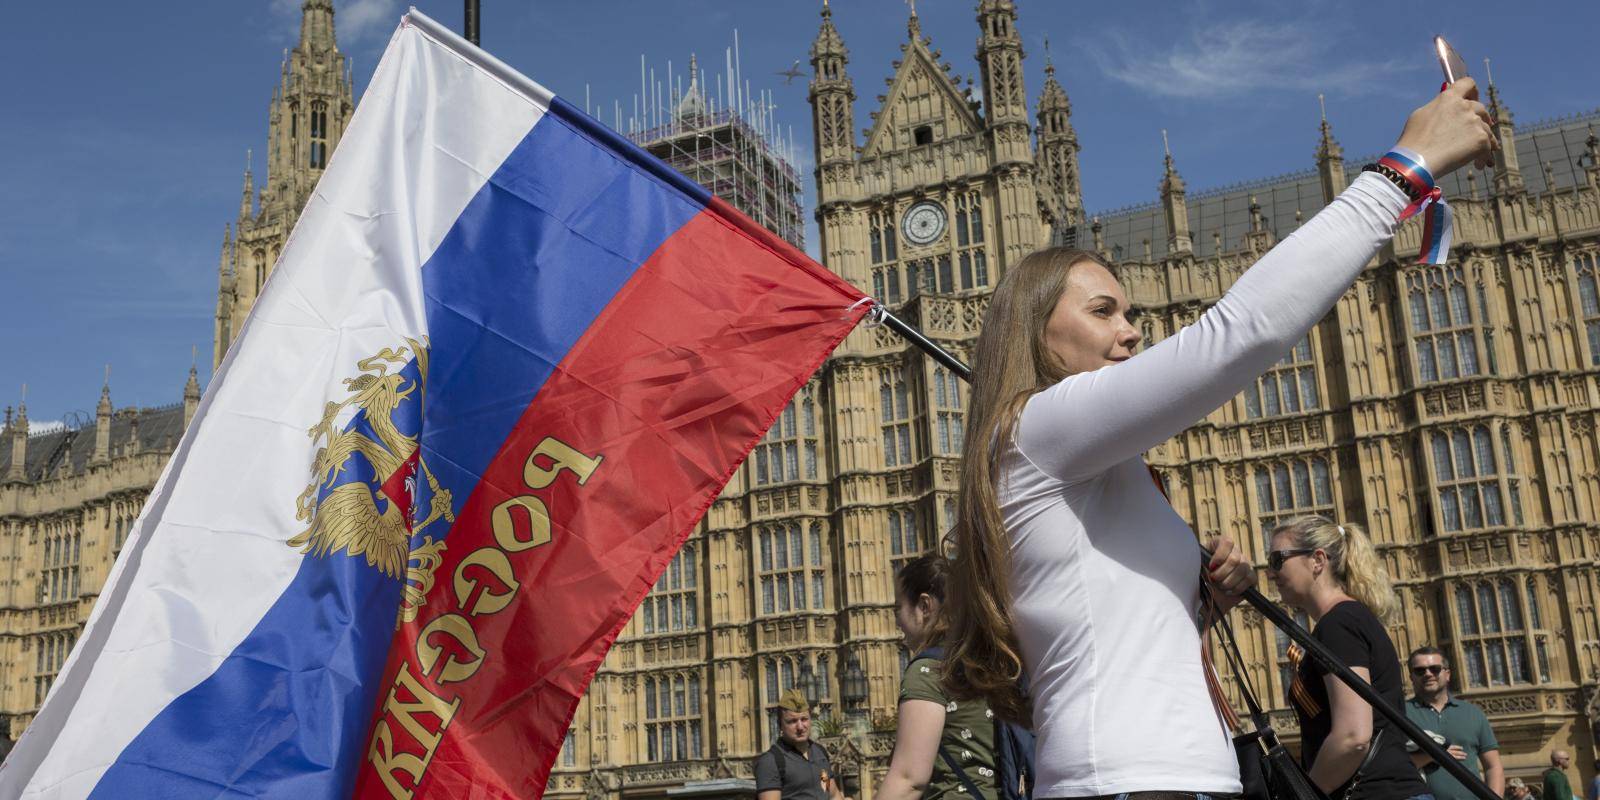 A woman carrying a Russian flag parades in front of the Palace of Westminster